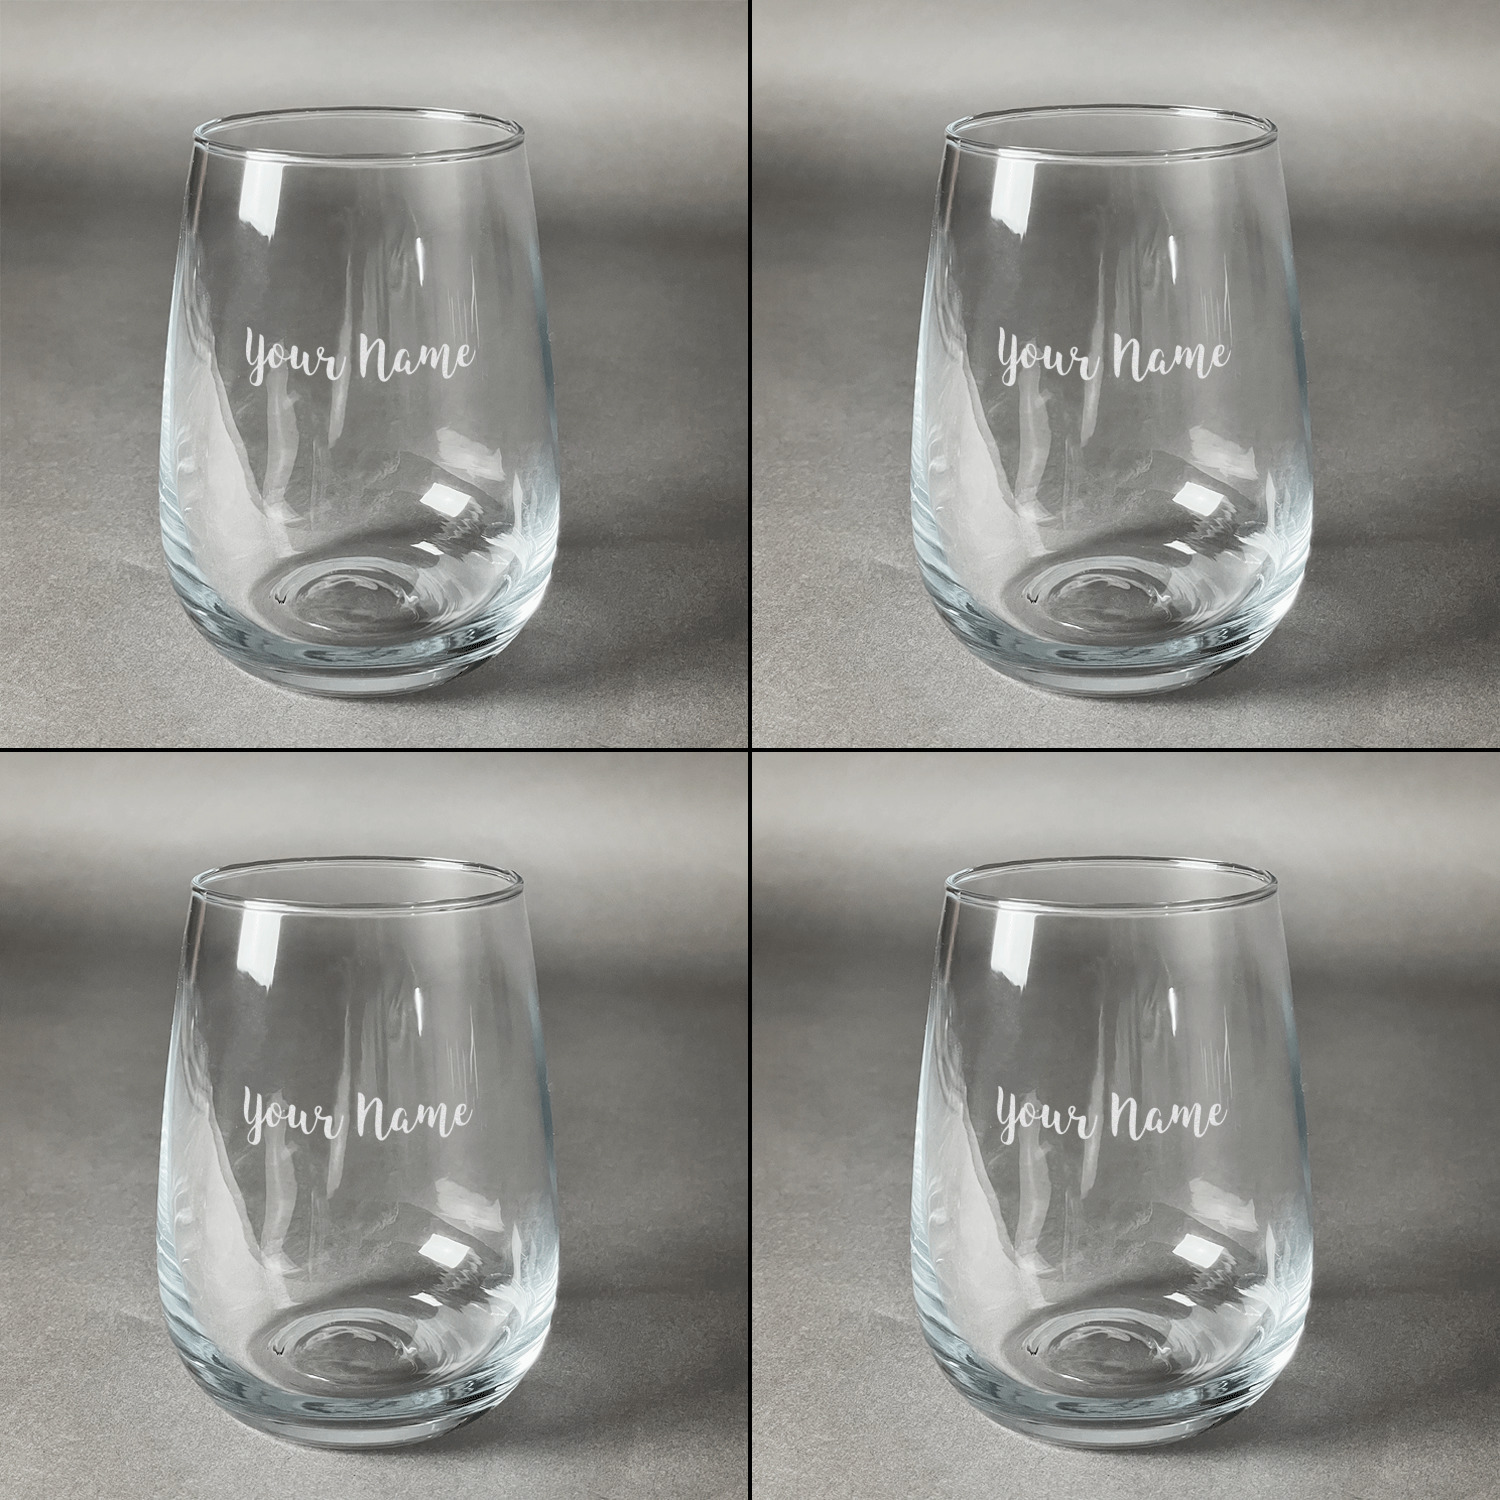 https://www.youcustomizeit.com/common/MAKE/837464/Script-Name-Set-of-Four-Personalized-Stemless-Wineglasses-Approval.jpg?lm=1690555874